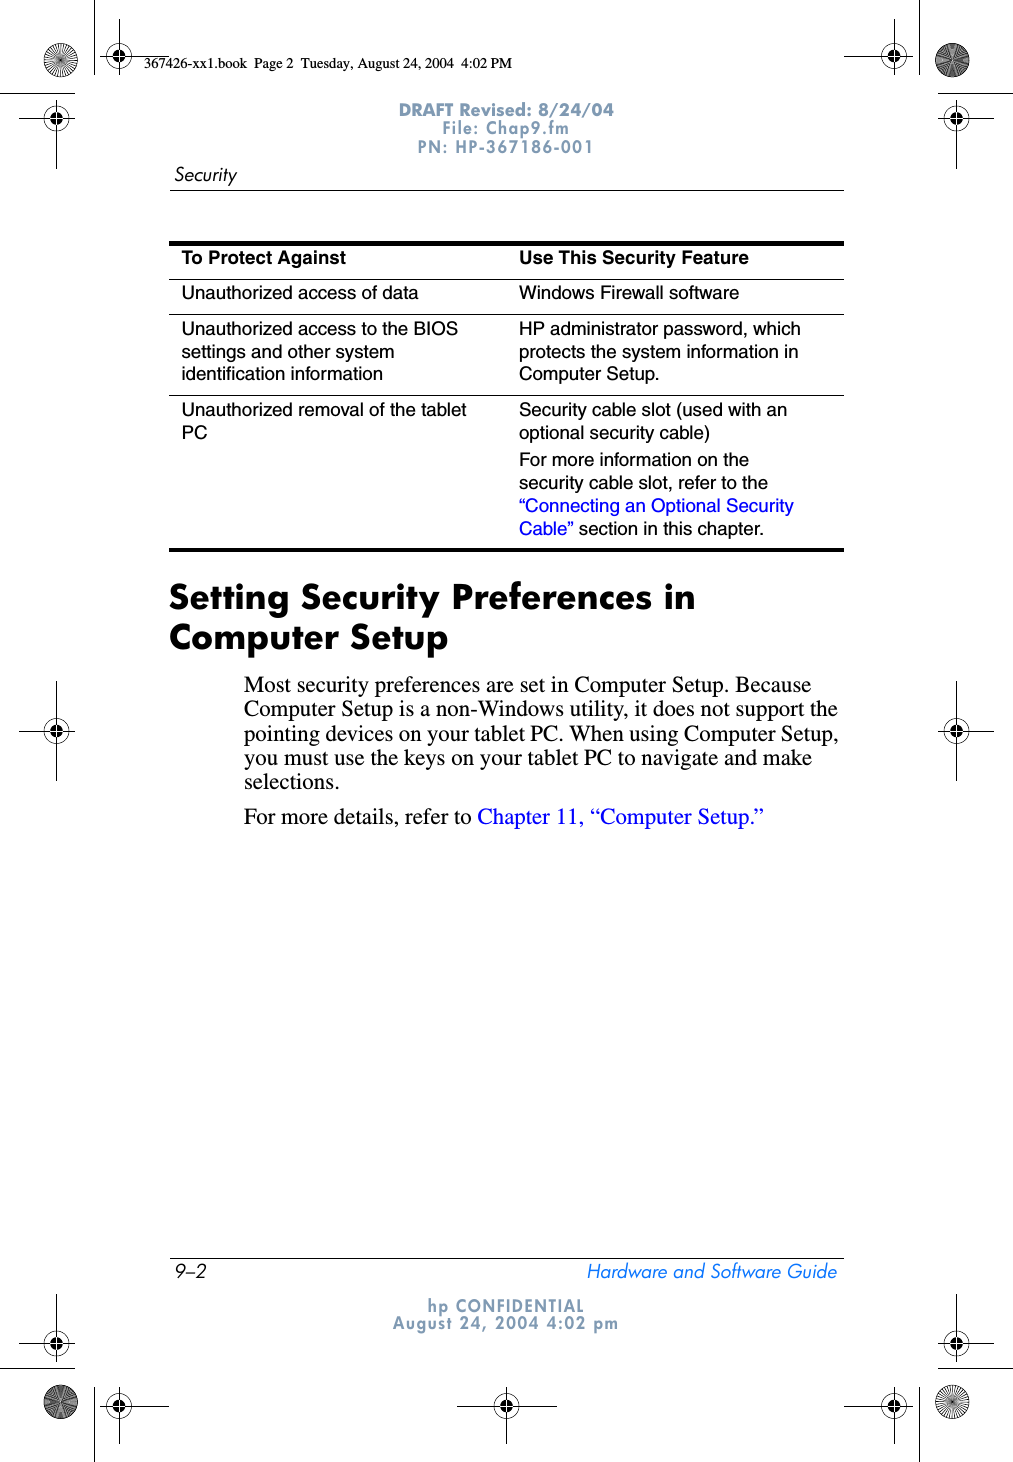 9–2 Hardware and Software GuideSecurityDRAFT Revised: 8/24/04File: Chap9.fm PN: HP-367186-001 hp CONFIDENTIALAugust 24, 2004 4:02 pmSetting Security Preferences in Computer SetupMost security preferences are set in Computer Setup. Because Computer Setup is a non-Windows utility, it does not support the pointing devices on your tablet PC. When using Computer Setup, you must use the keys on your tablet PC to navigate and make selections.For more details, refer to Chapter 11, “Computer Setup.” Unauthorized access of data Windows Firewall softwareUnauthorized access to the BIOS settings and other system identification informationHP administrator password, which protects the system information in Computer Setup.Unauthorized removal of the tablet PCSecurity cable slot (used with an optional security cable)For more information on the security cable slot, refer to the “Connecting an Optional Security Cable” section in this chapter.To Protect Against Use This Security Feature367426-xx1.book  Page 2  Tuesday, August 24, 2004  4:02 PM